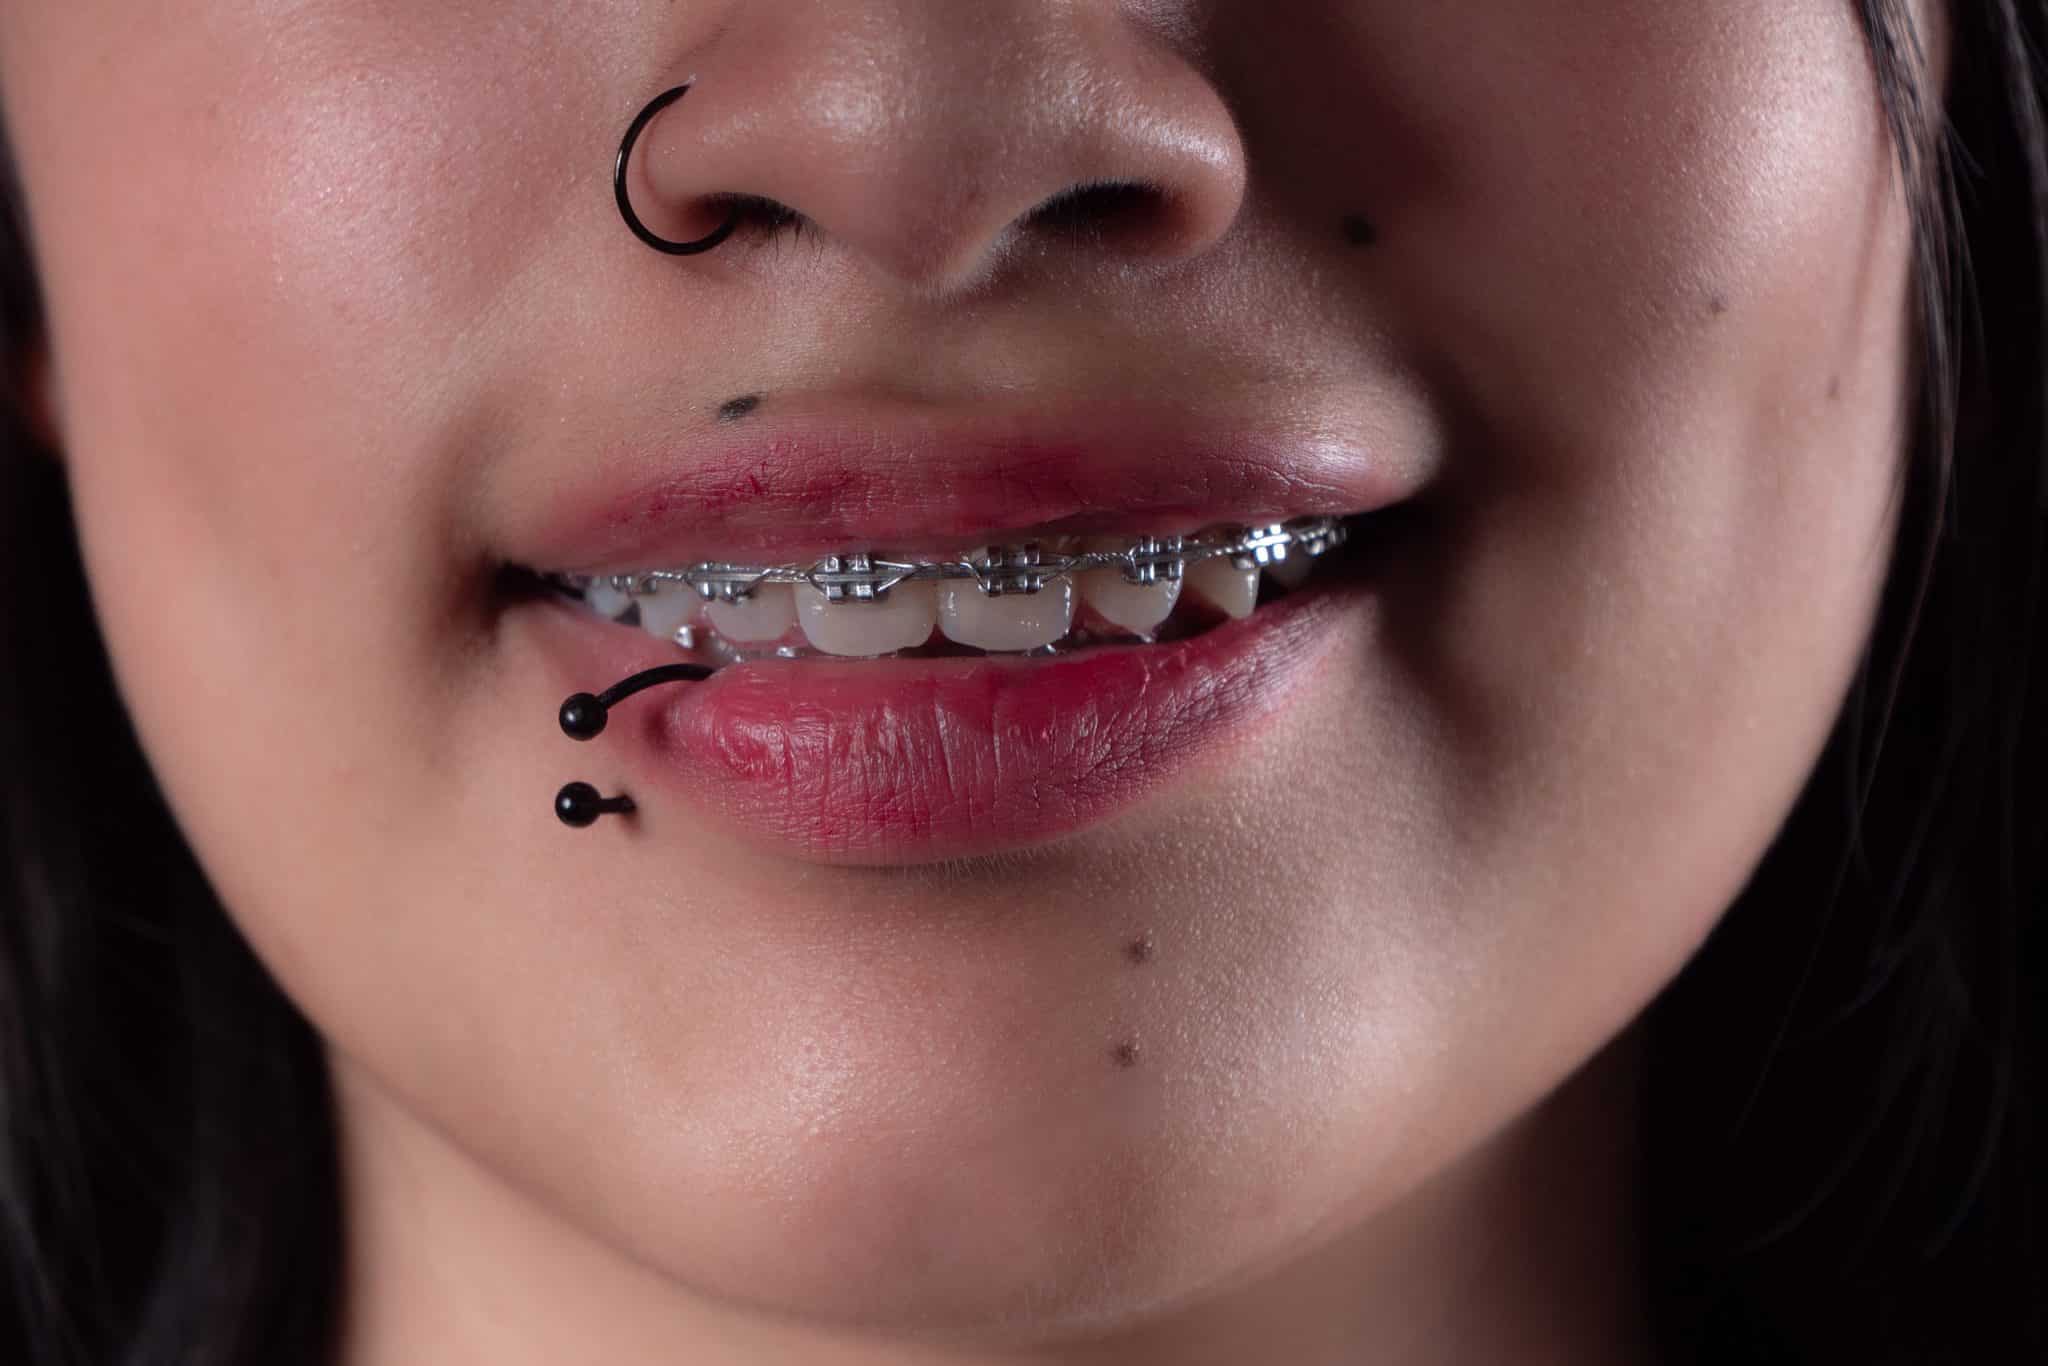 A photo of a girl with a lip piercing and braces